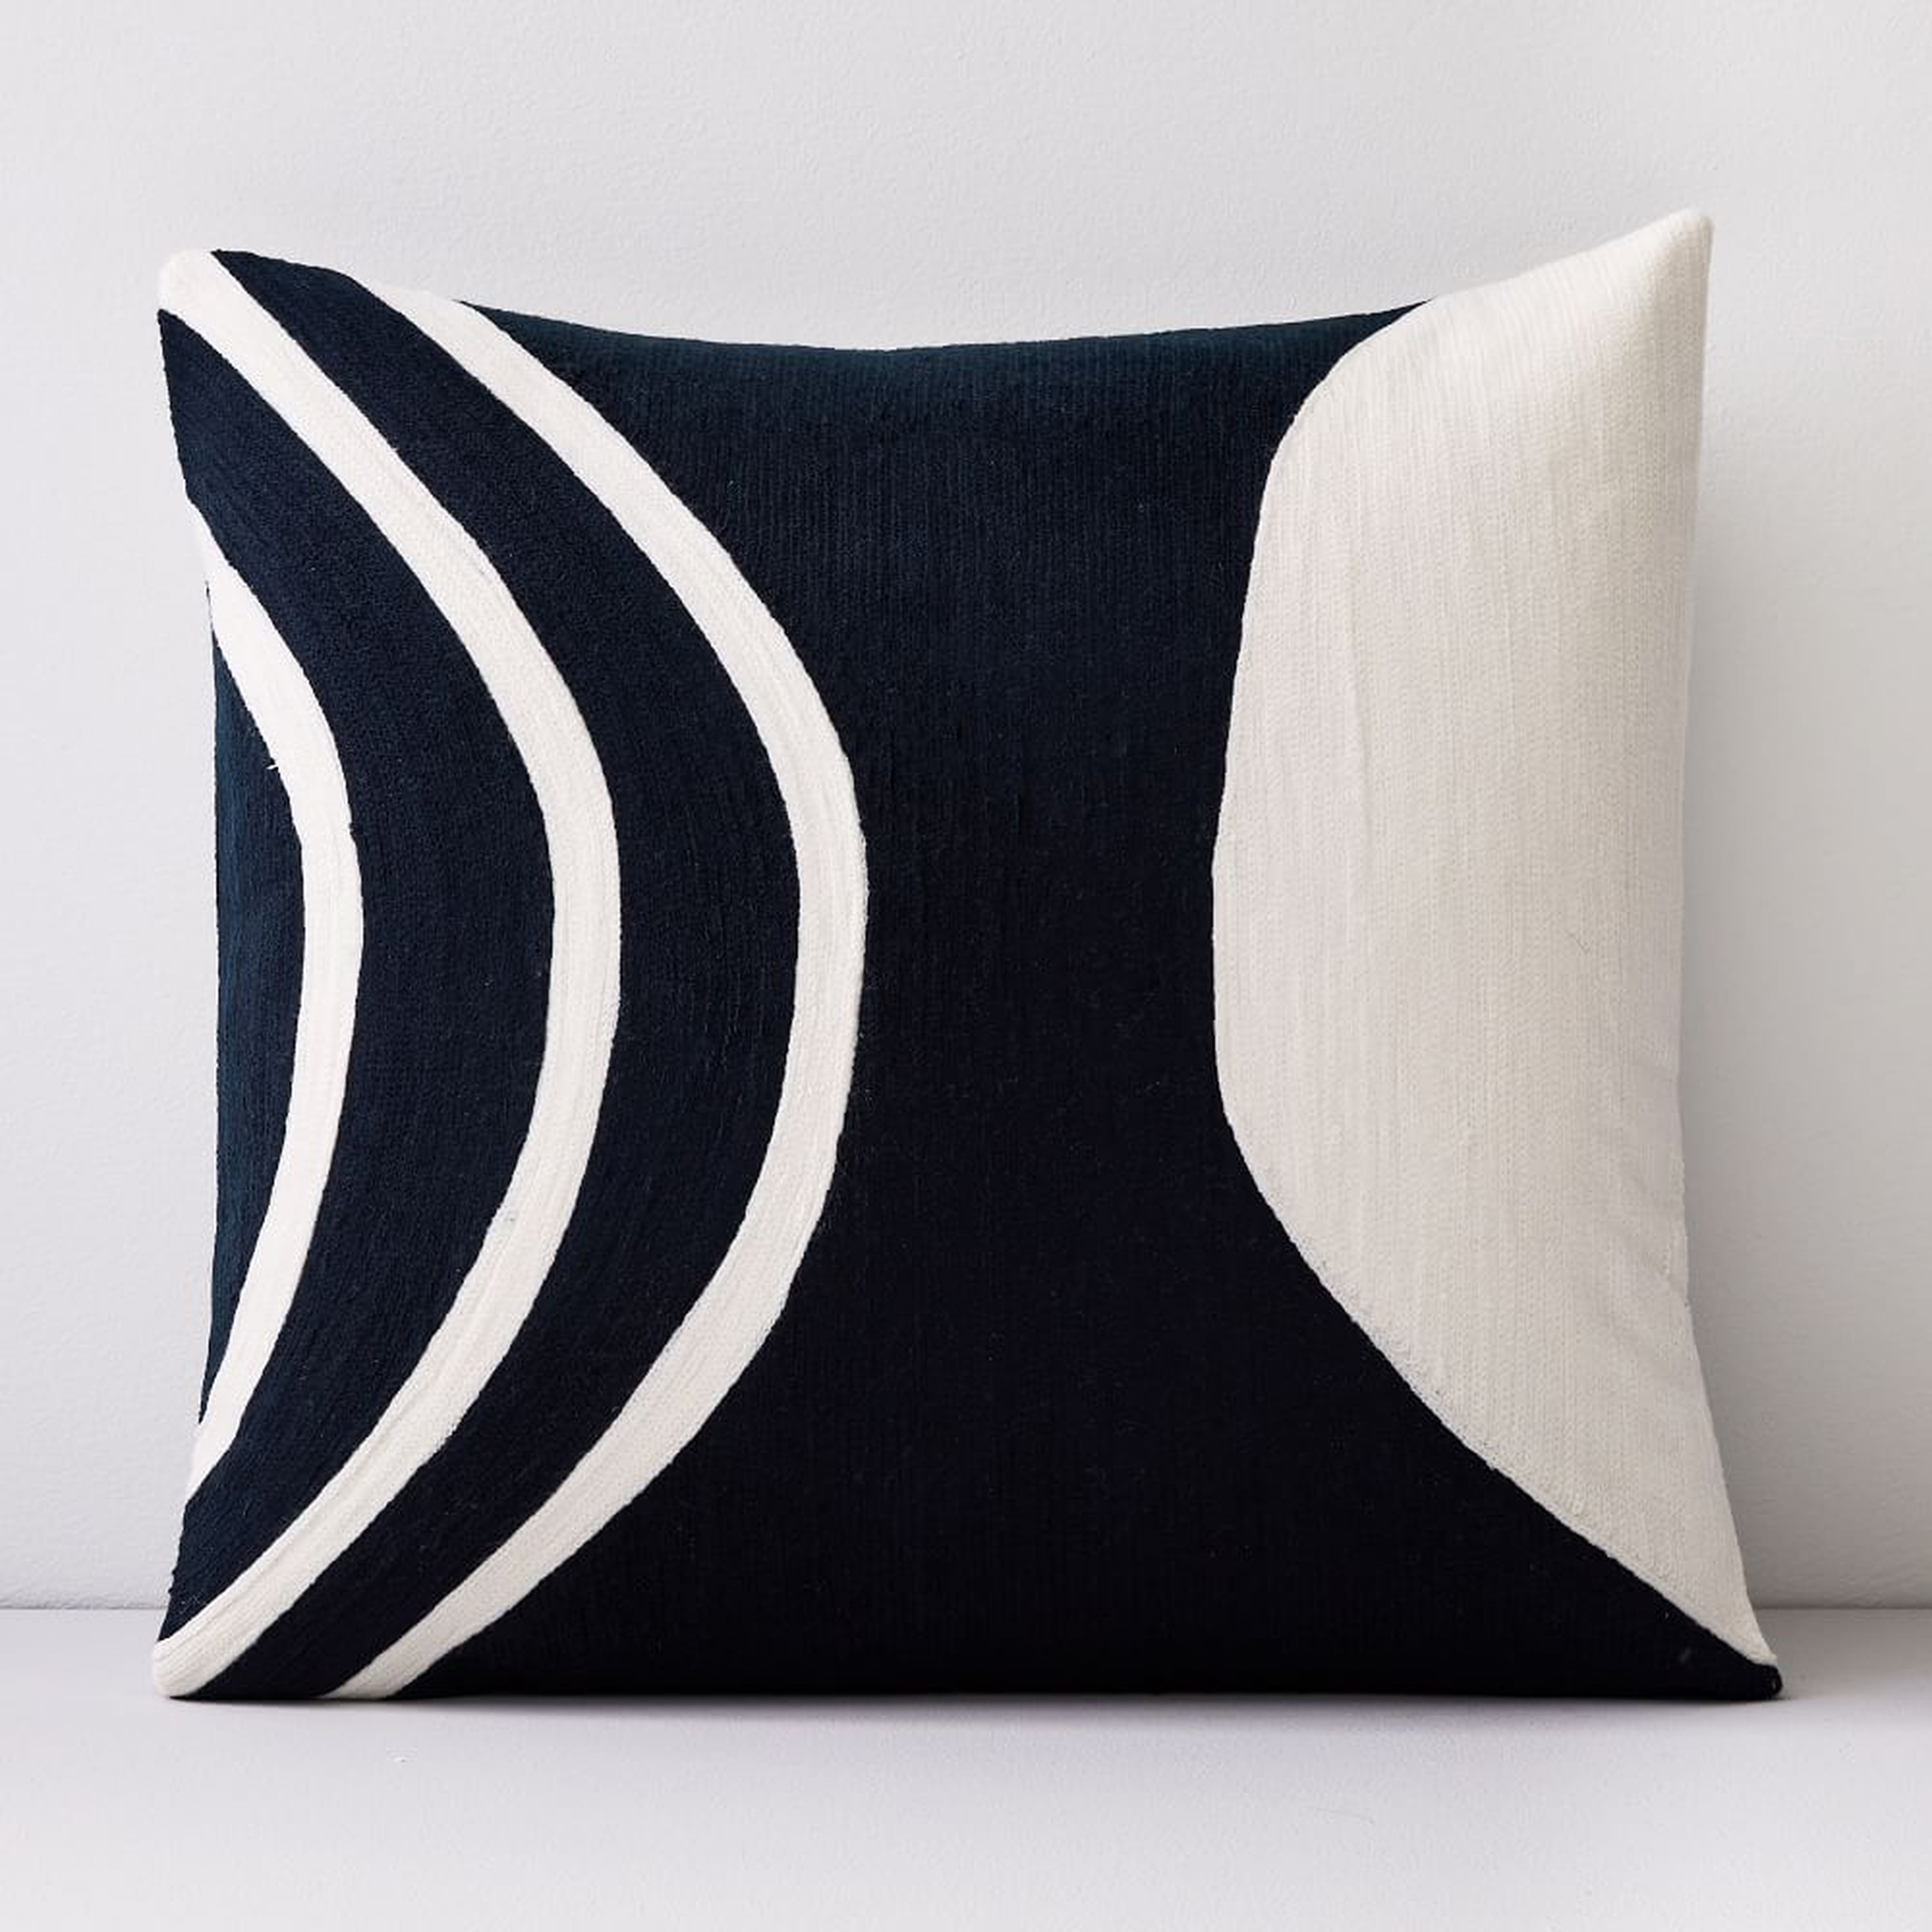 Crewel Rounded Pillow Cover, Midnight, 18"x18" - West Elm